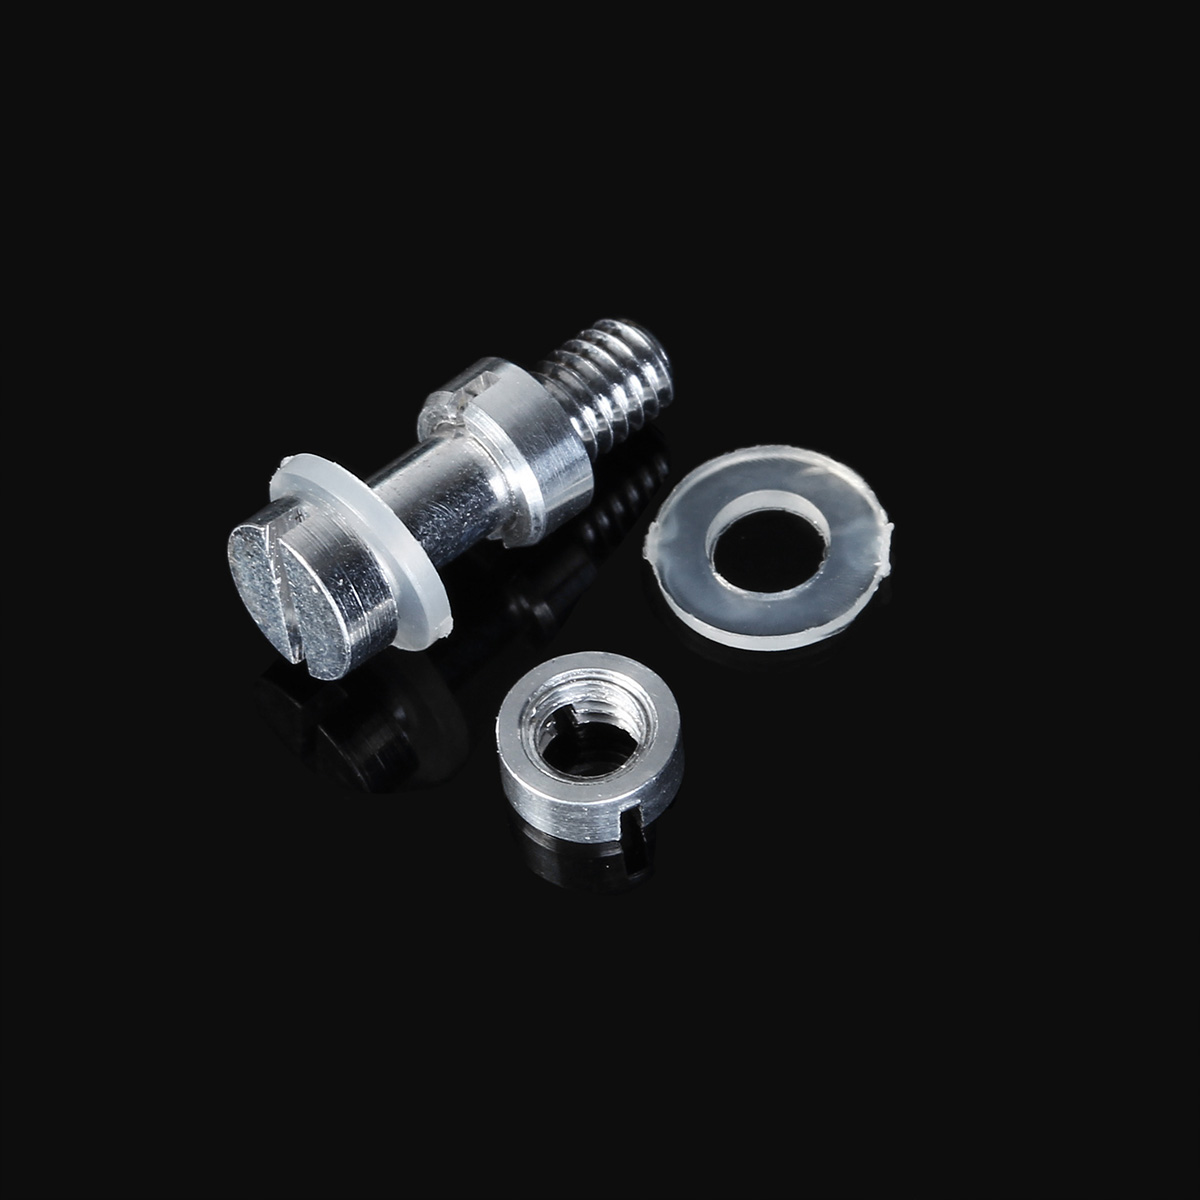 7.5mm/10.5mm/11.5mm/13.5mm/16.5mm M2.5mm Mounting Screw Set For Record Player 23